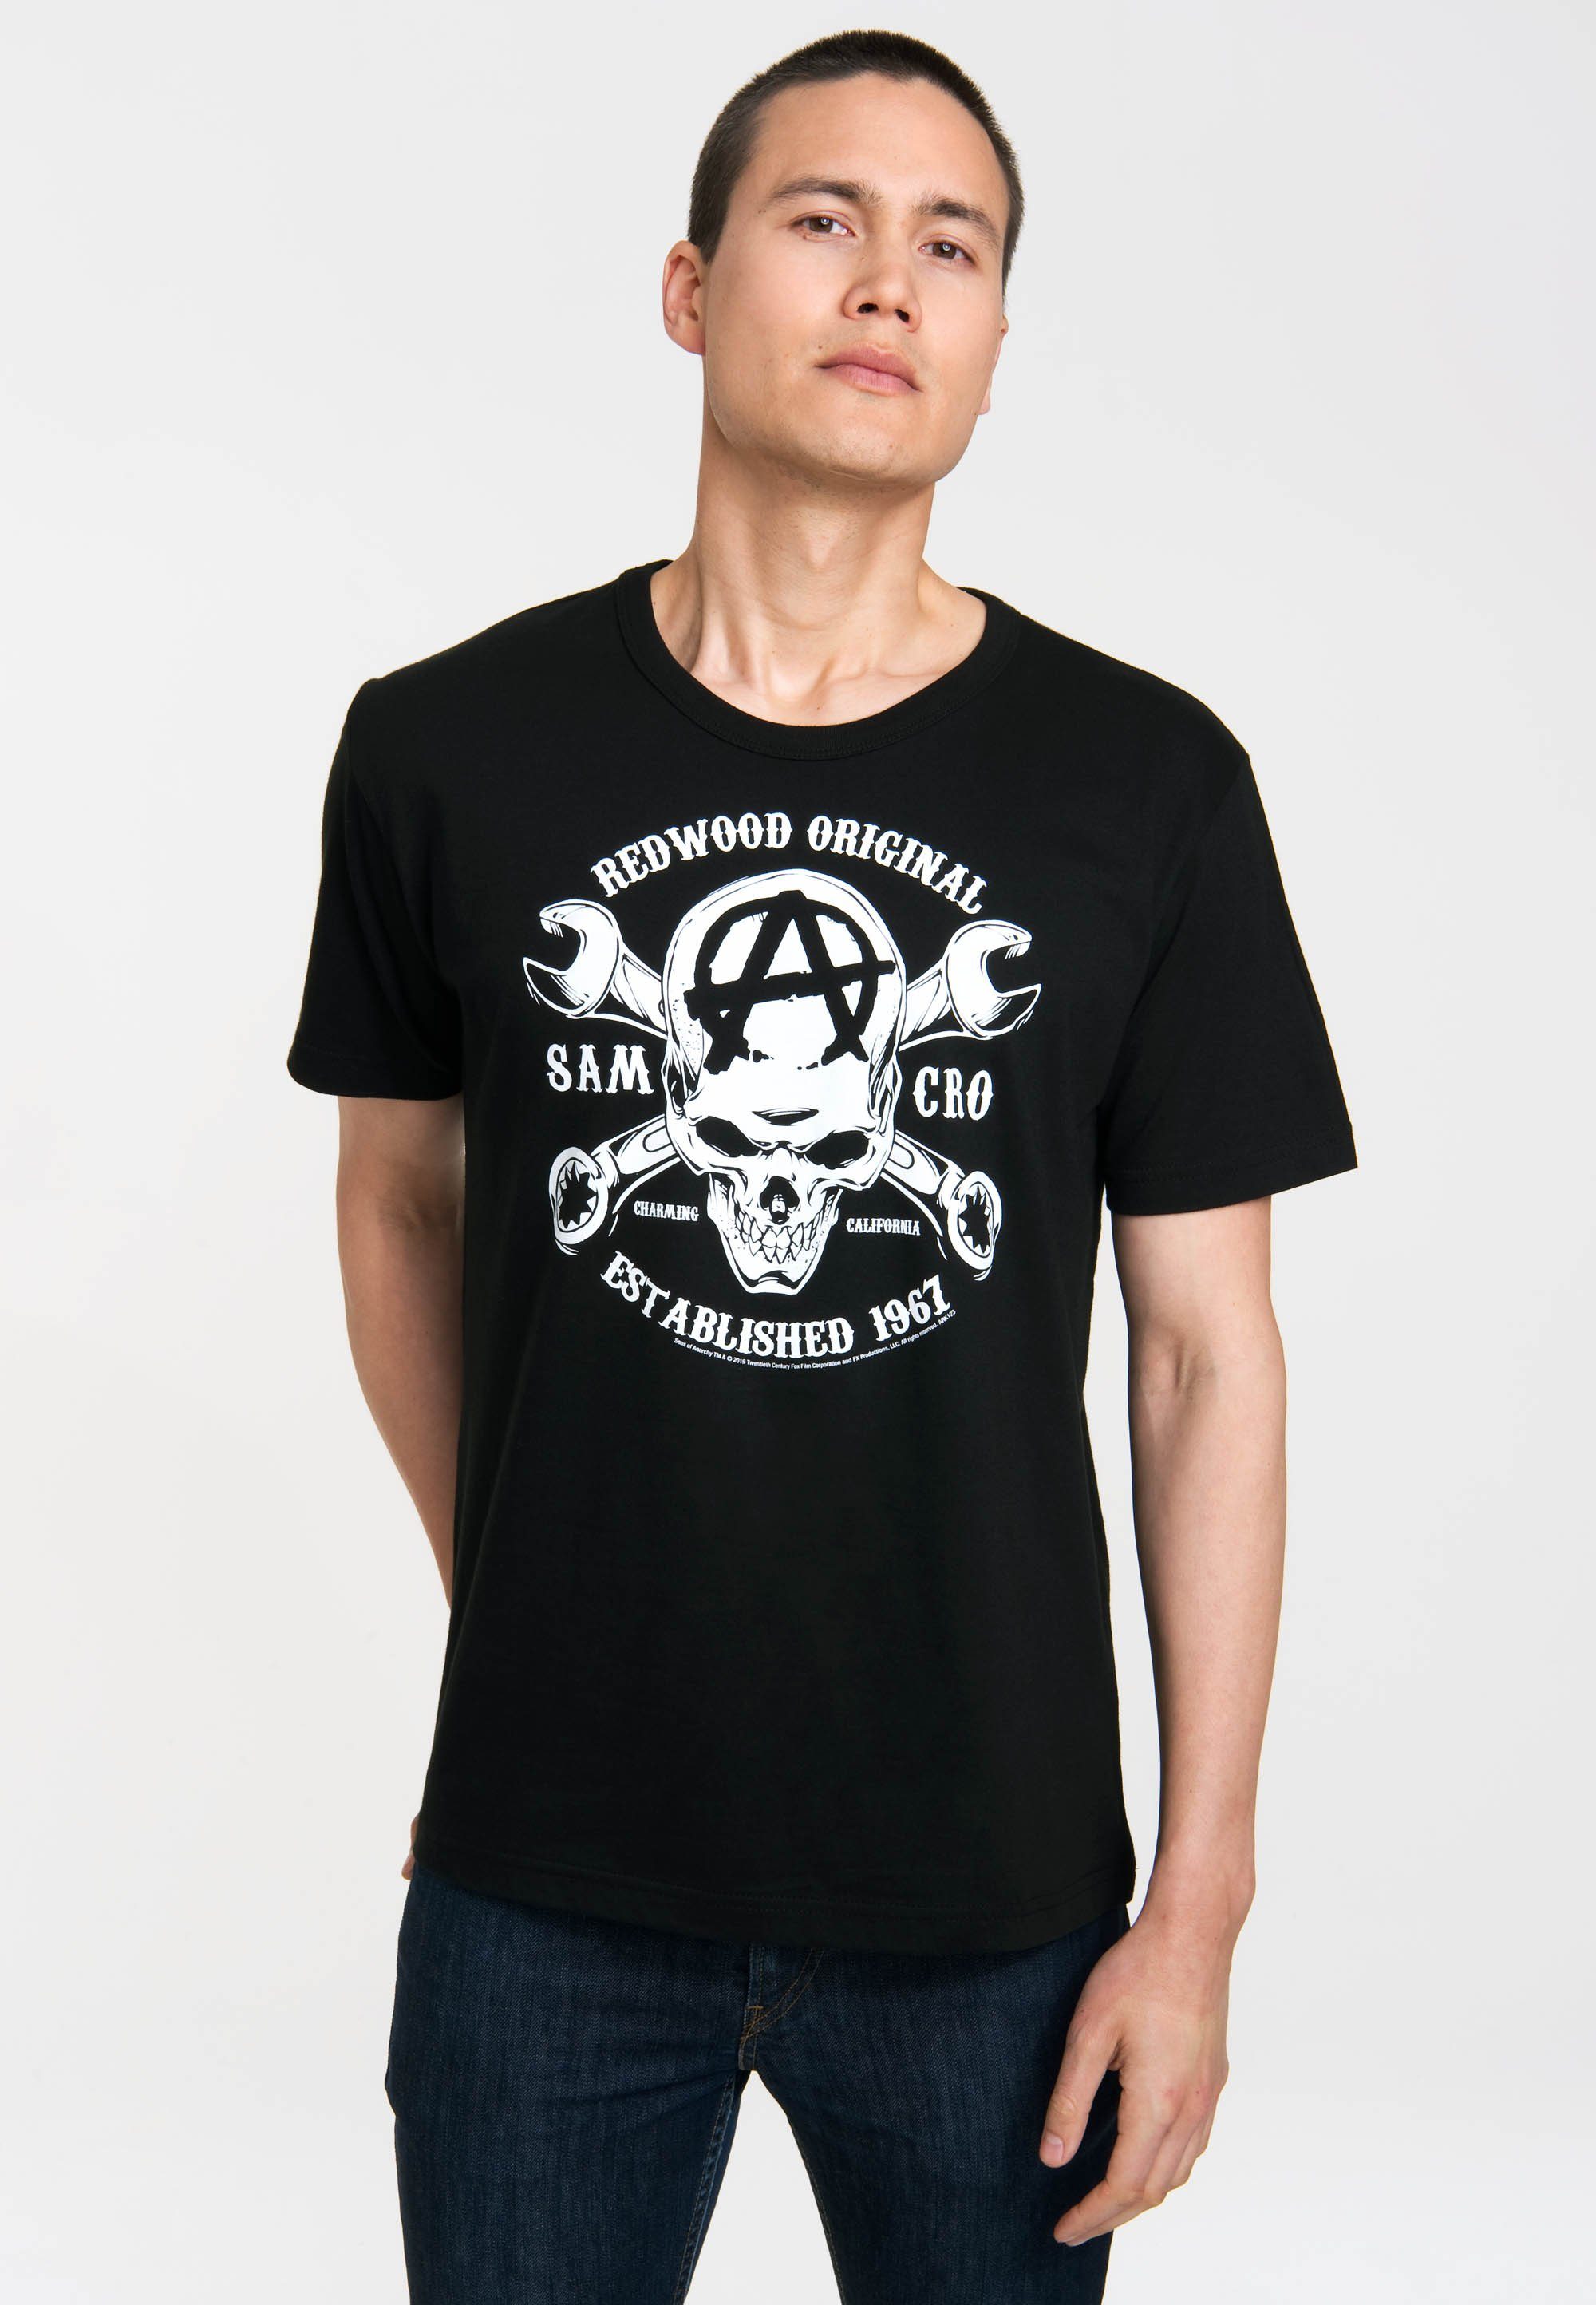 Anarchy mit of SAMCRO T-Shirt LOGOSHIRT Sons Sons Anarchy-Print of